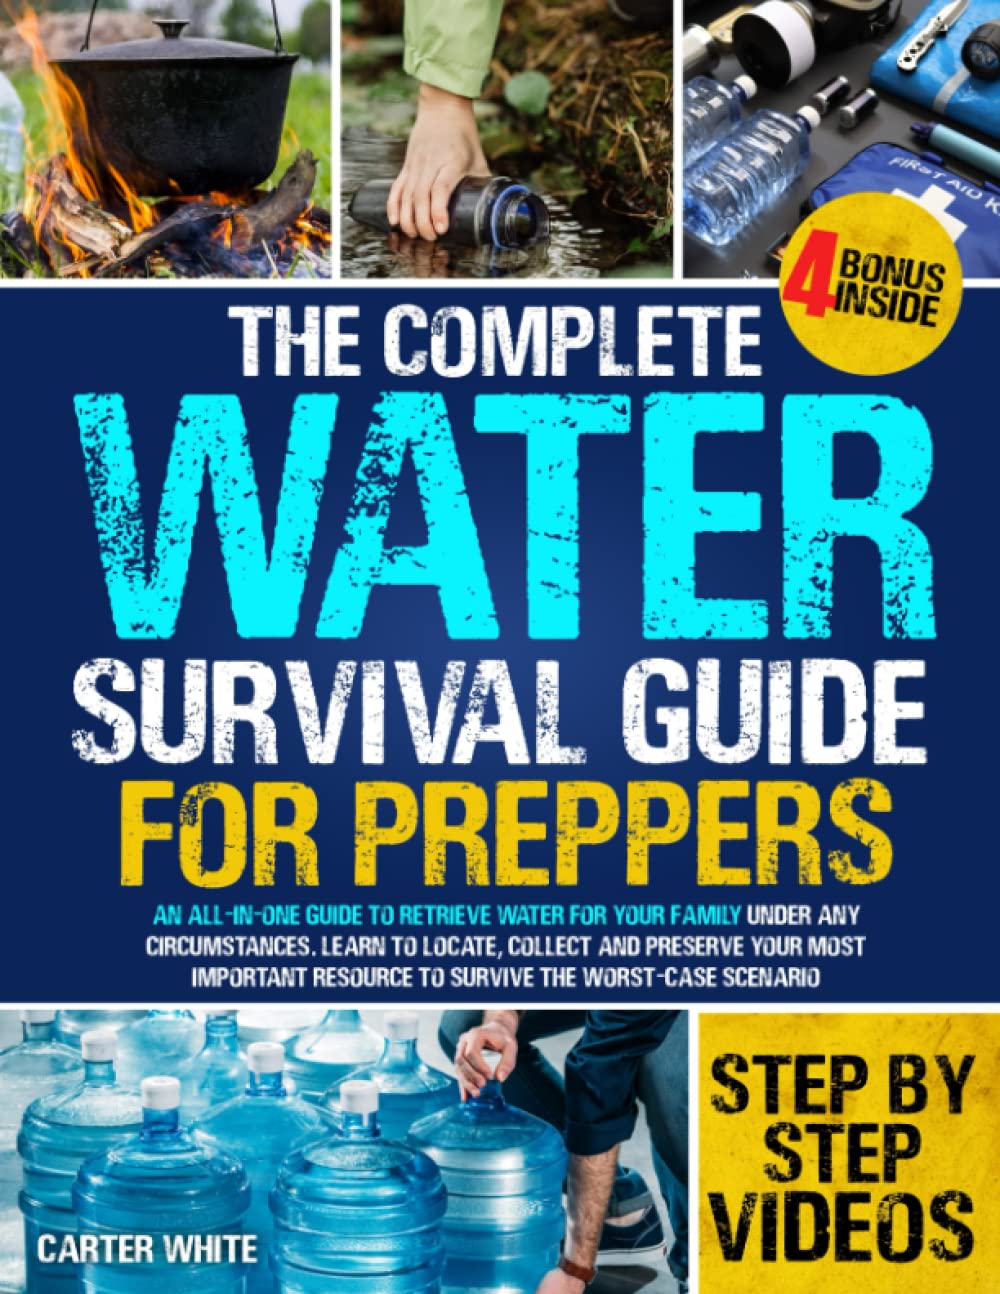 The Complete Water Survival Guide for Preppers: An All-In-One Guide to Retrieve Water for Your Family Under Any Circumstances. Learn to Locate, Collect and Preserve Your Most Important Resource